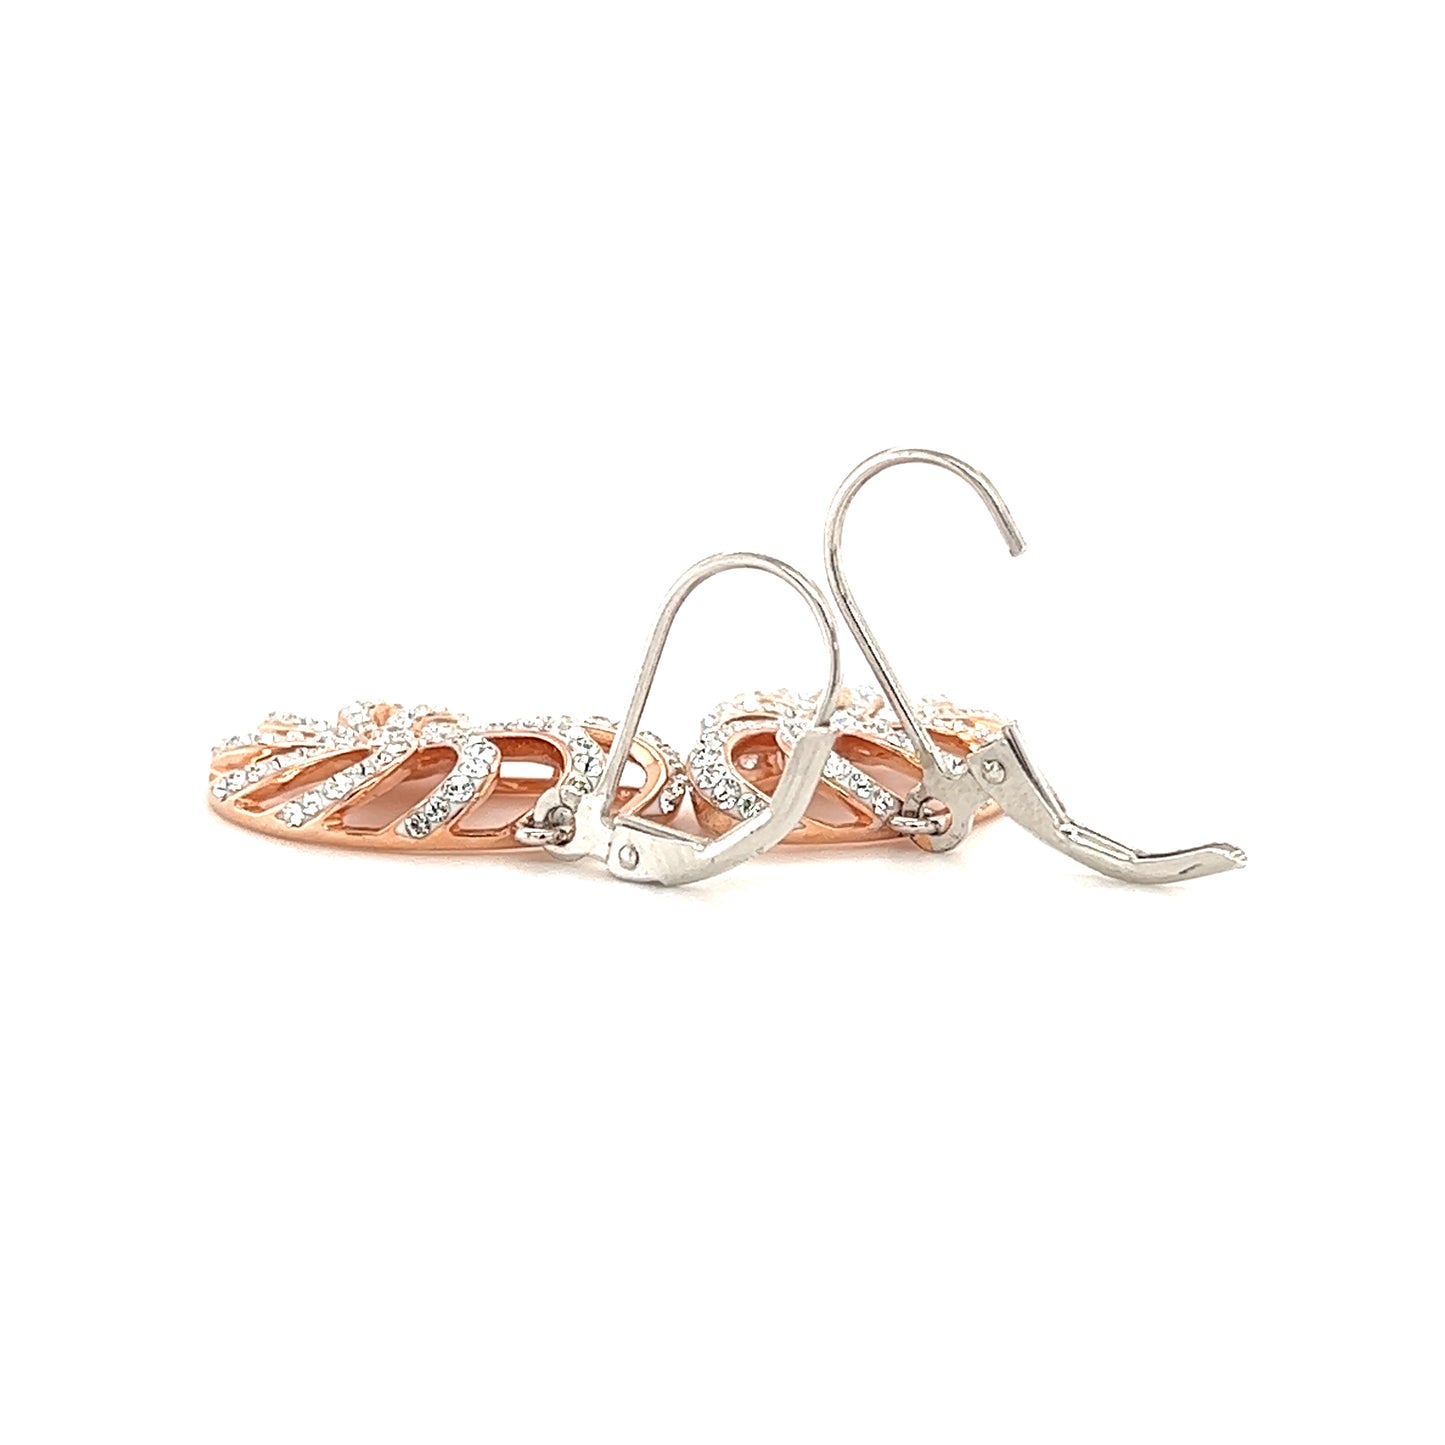 Nautilus Shell Dangle Earrings with Rose Gold Plate and White Crystals in Sterling Silver Lever Backs View